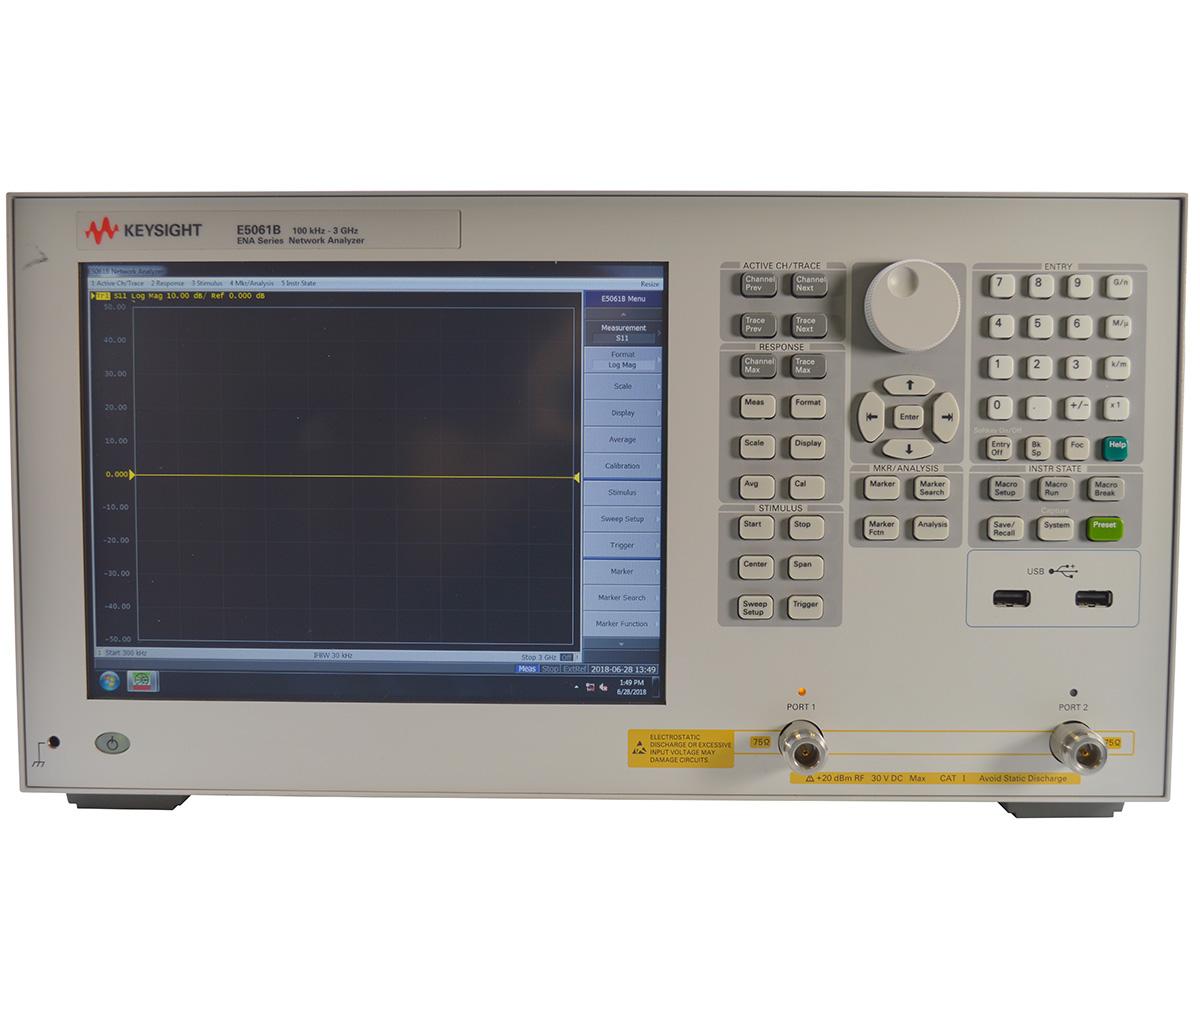 Product Keysight Technologies E5061B-237| TRS-RenTelco Rent or Buy image